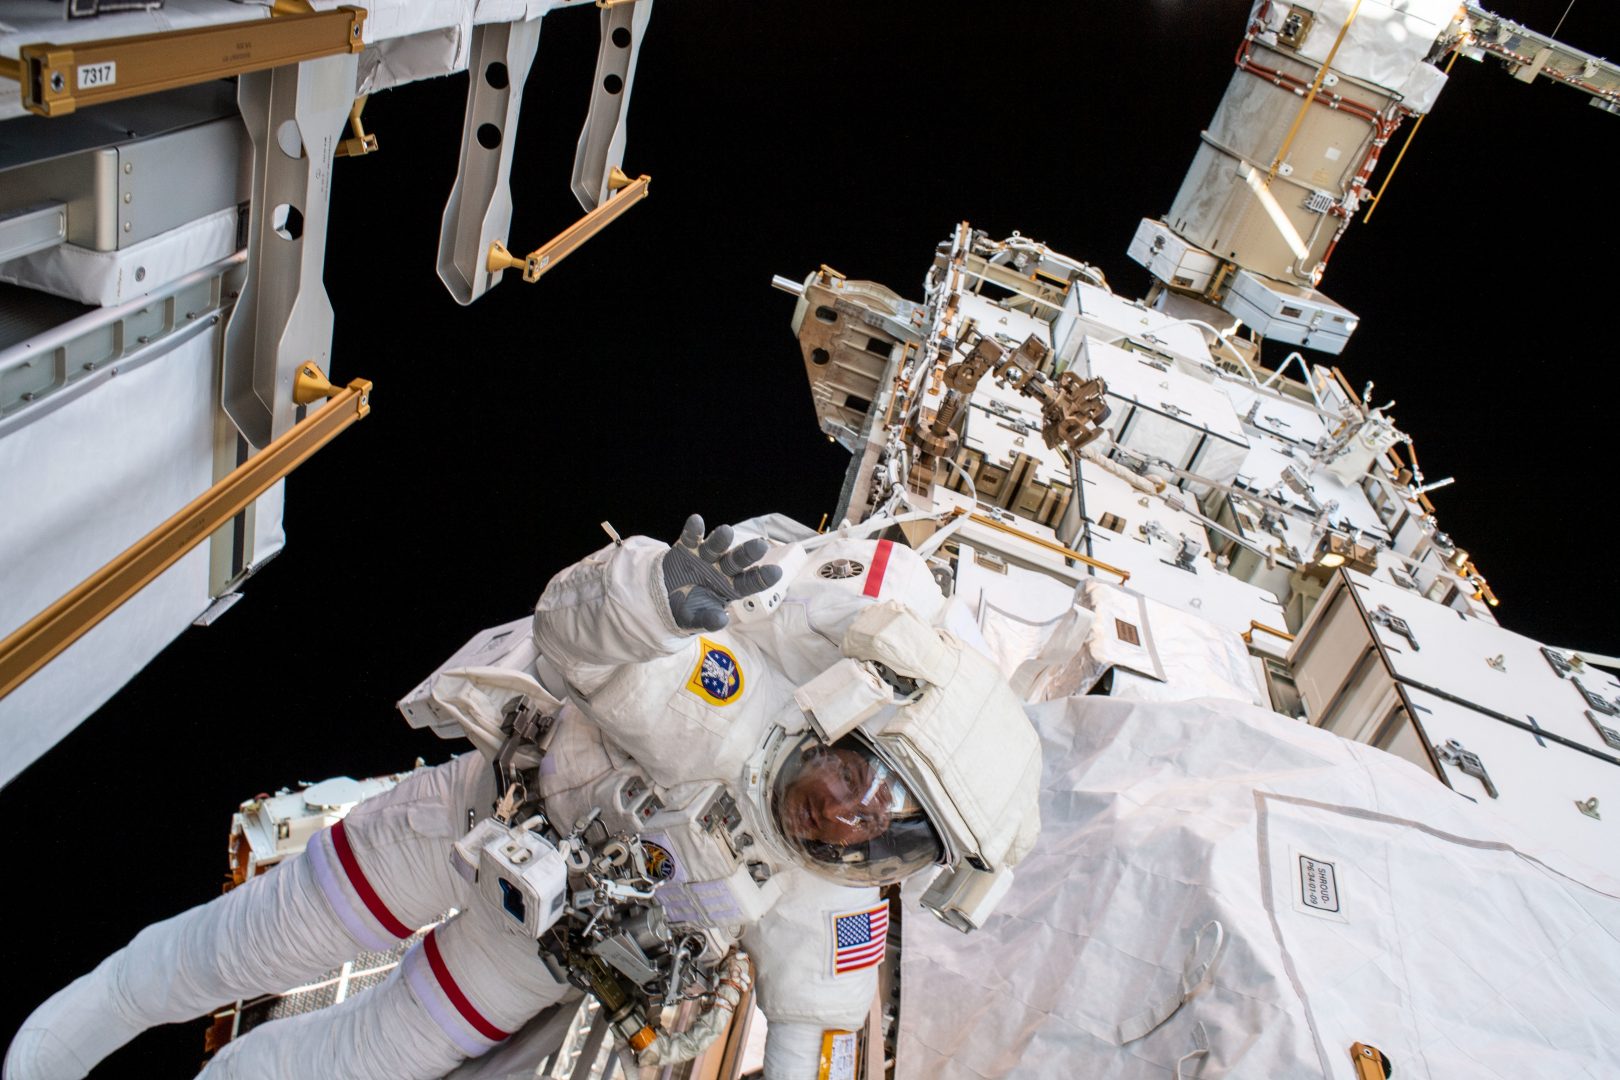 NASA astronaut Andrew Morgan waves to the camera while tethered on the Port 6 (P6) truss segment of the International Space Stations. He and fellow NASA astronaut Christina Koch (out of frame) worked to replace older hydrogen-nickel batteries with newer, more powerful lithium-ion batteries on the P6 truss during the six-hour and 45-minute spacewalk.